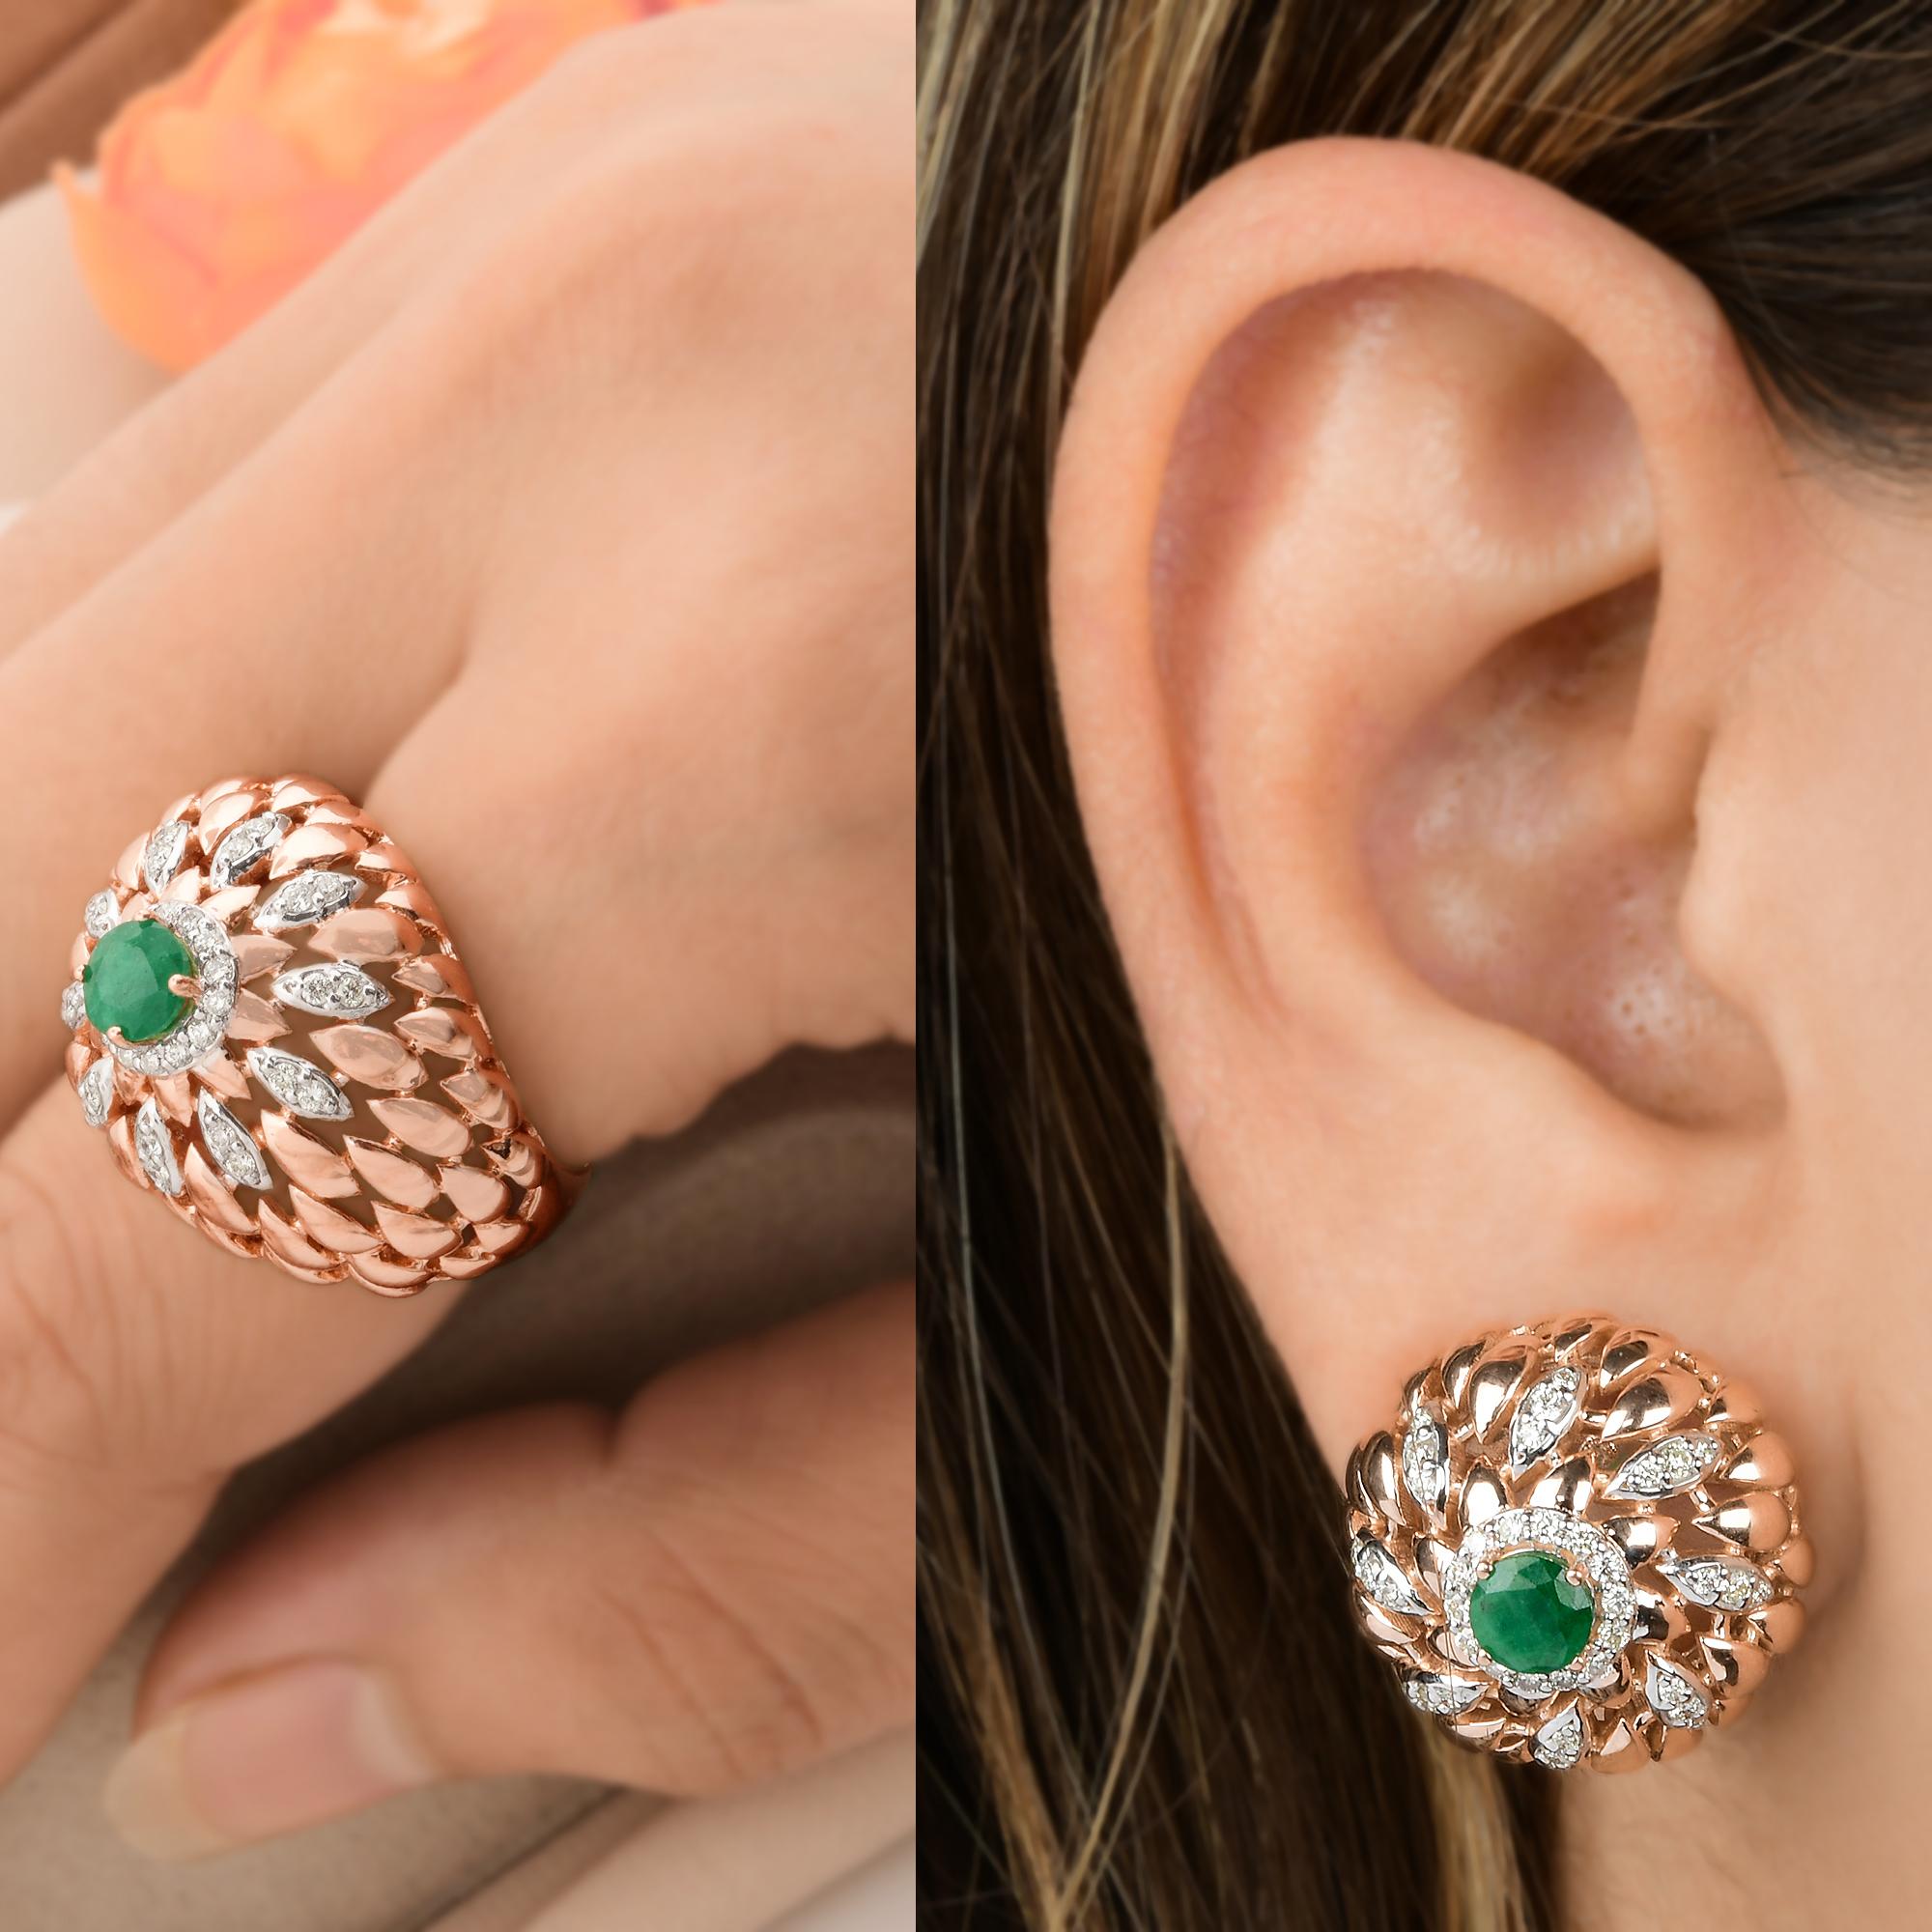 Round Cut Zambian Emerald Gemstone Dome Ring Diamond Pave Solid 14k Rose Gold Fine Jewelry For Sale